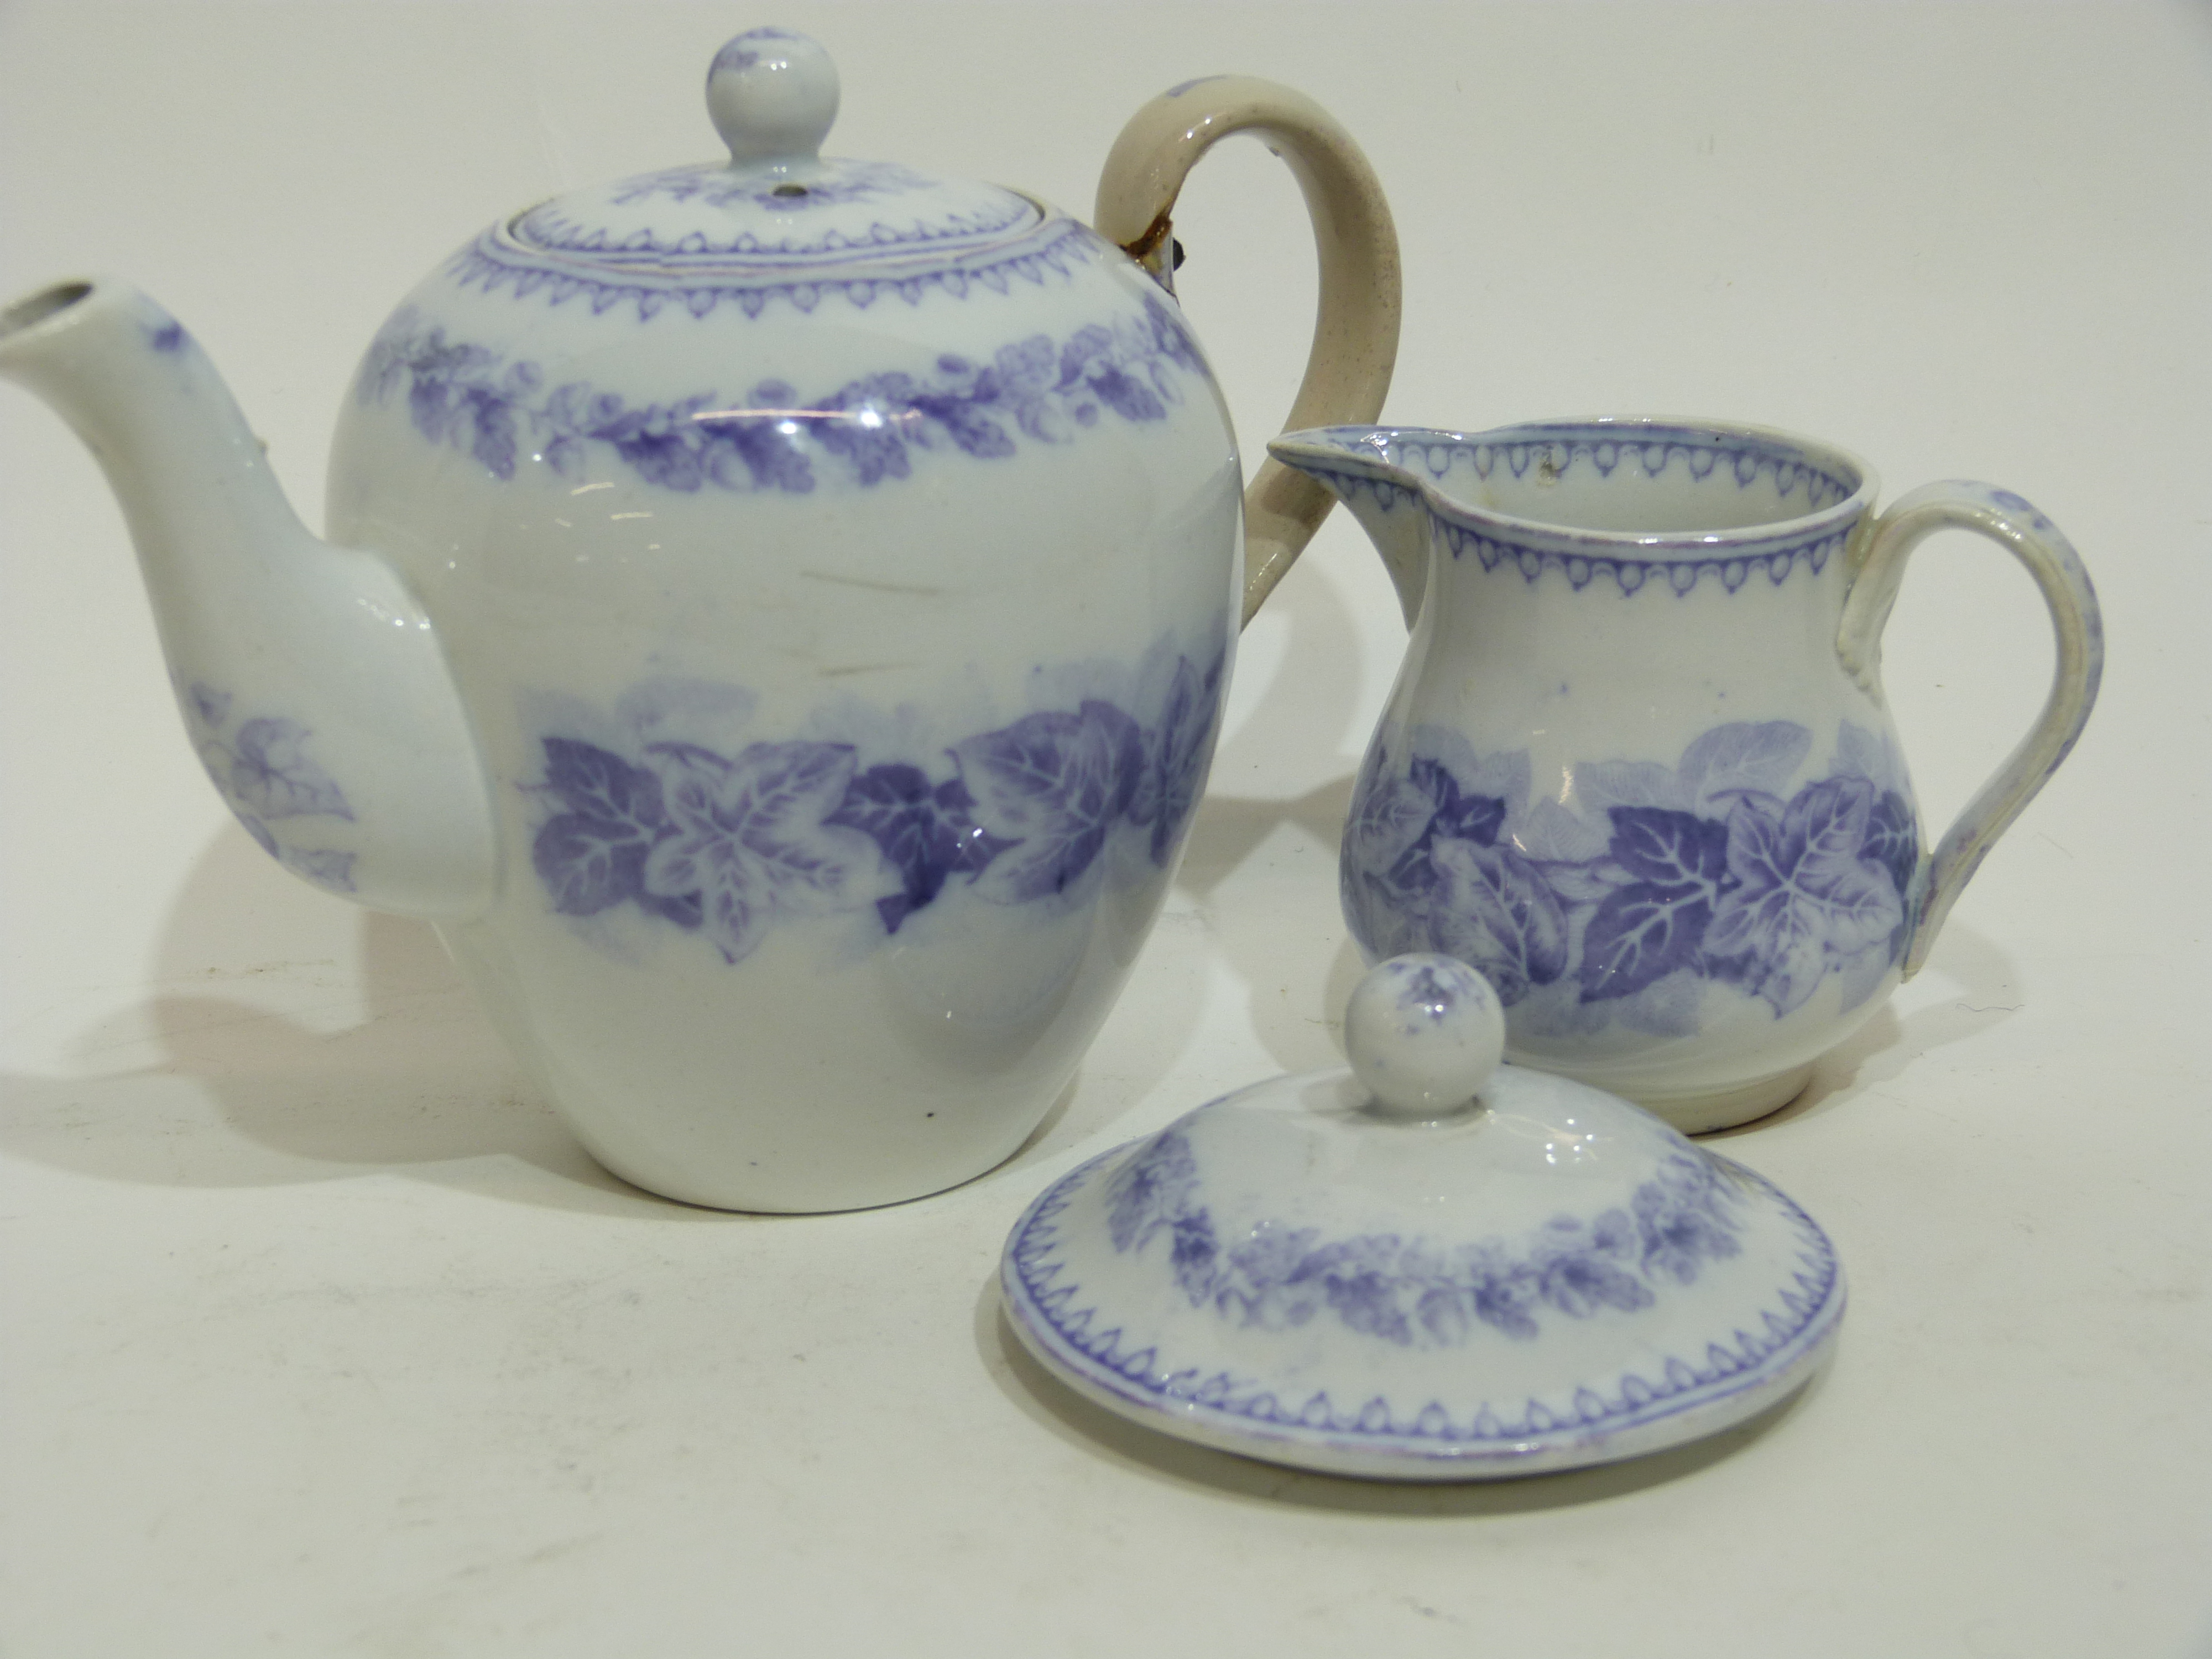 Victorian miniature tea set with blue floral decoration including tea cups and saucers - Image 3 of 4